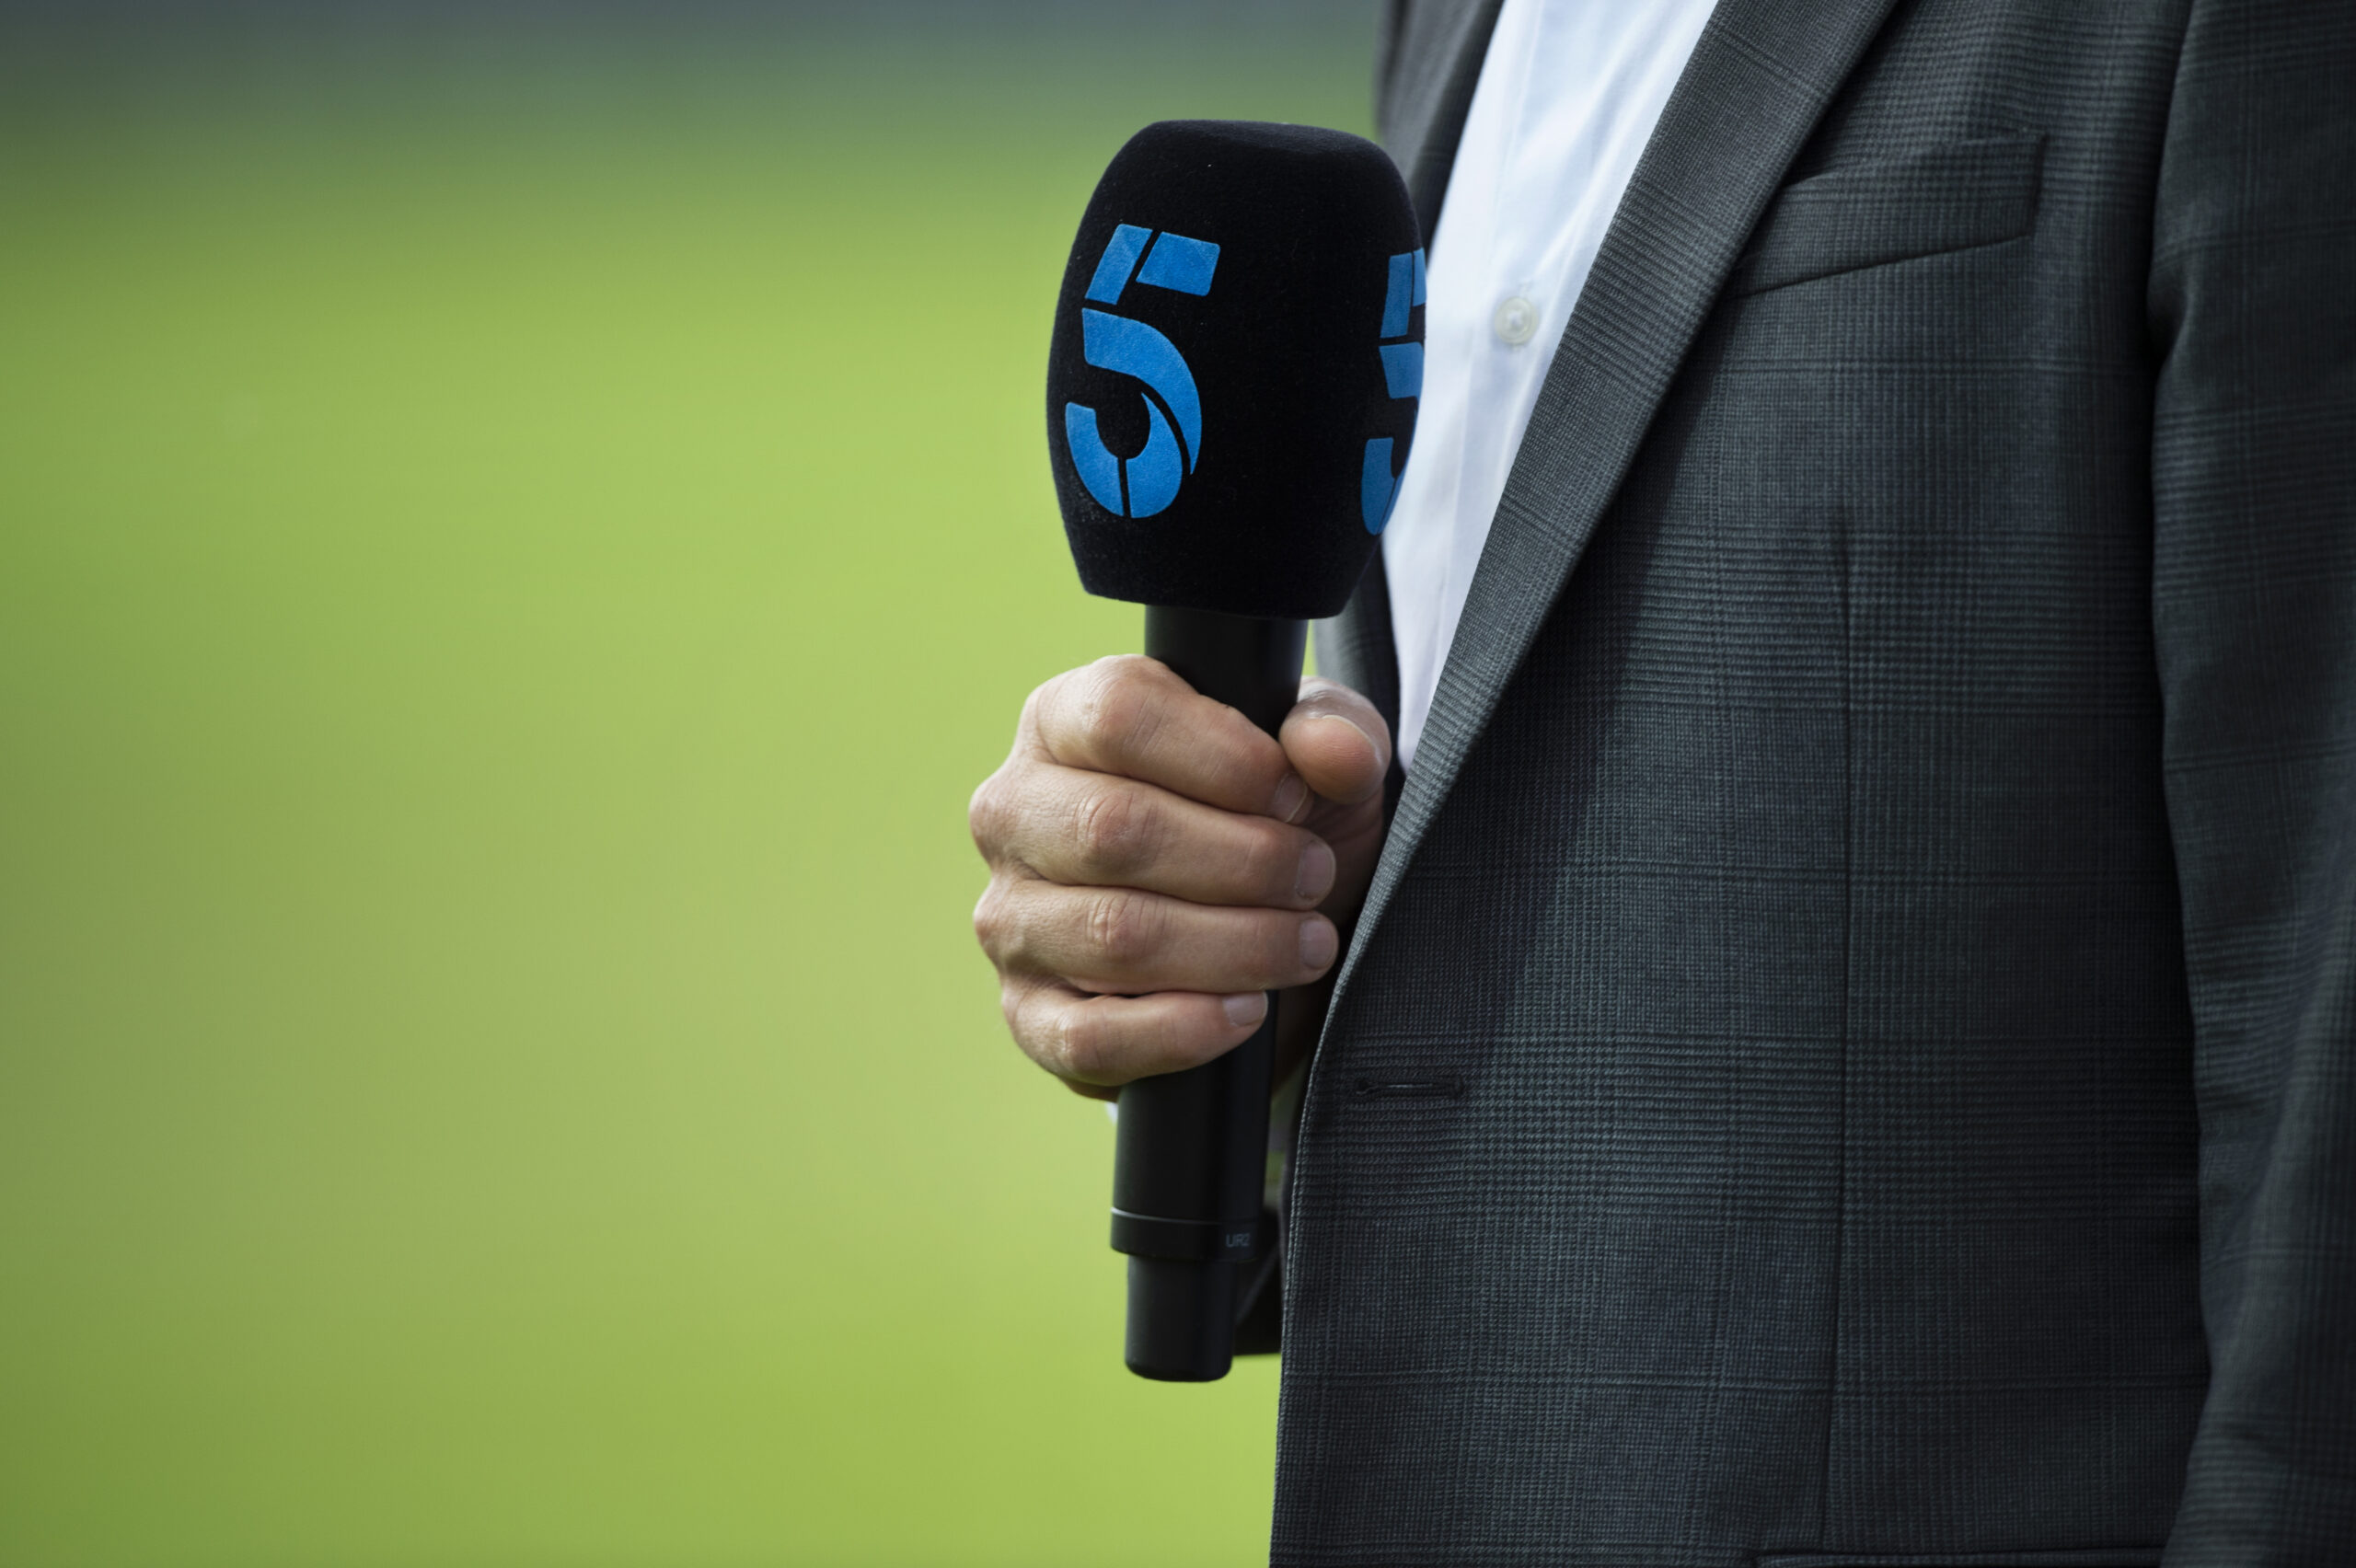 LEEDS, ENGLAND - JUNE 03: A Channel 5 microphone before day three of the 2nd NatWest Test match between England and Pakistan at Headingley on June 3, 2018 in Leeds, England. (Photo by Visionhaus/Corbis via Getty Images)